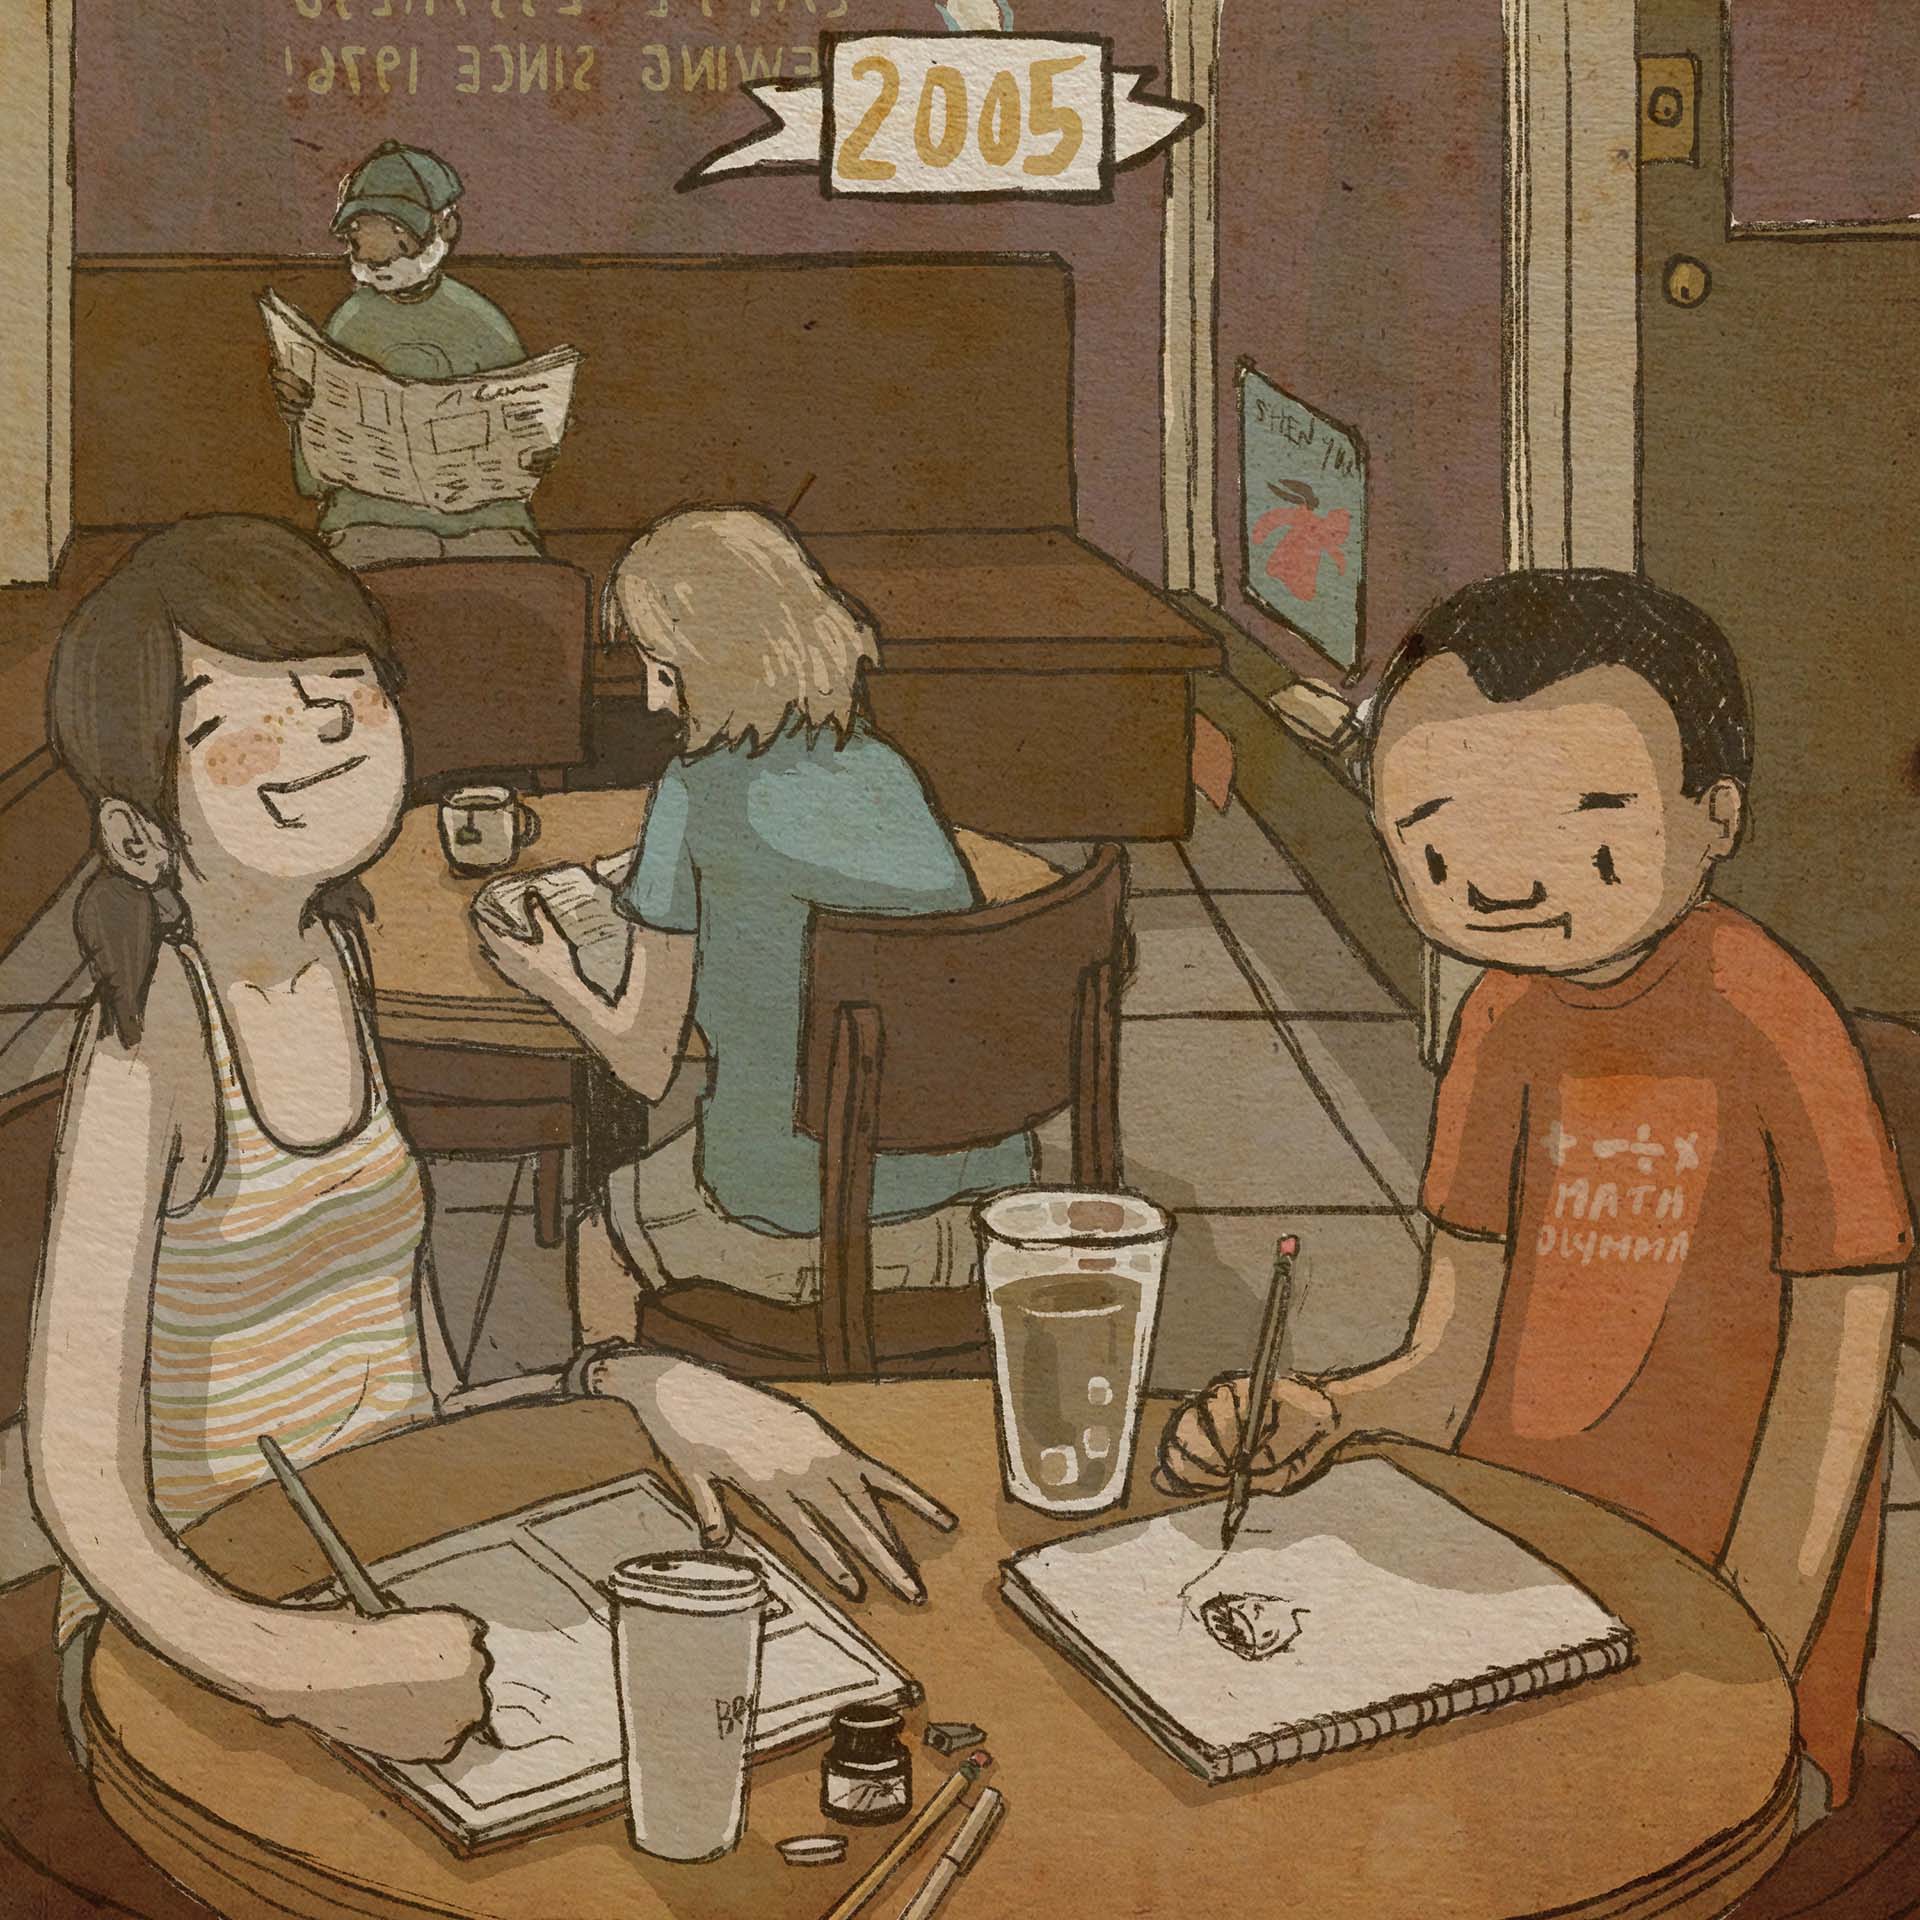 2005: Now wearing a striped tank top, Briana sits in the same coffee shop but is now joined by a friend — an Asian guy wearing a "Math Olympiad" t-shirt. The two are laughing and talking as they draw. The same older Black gentleman from the previous panel sits on his bench reading the paper.